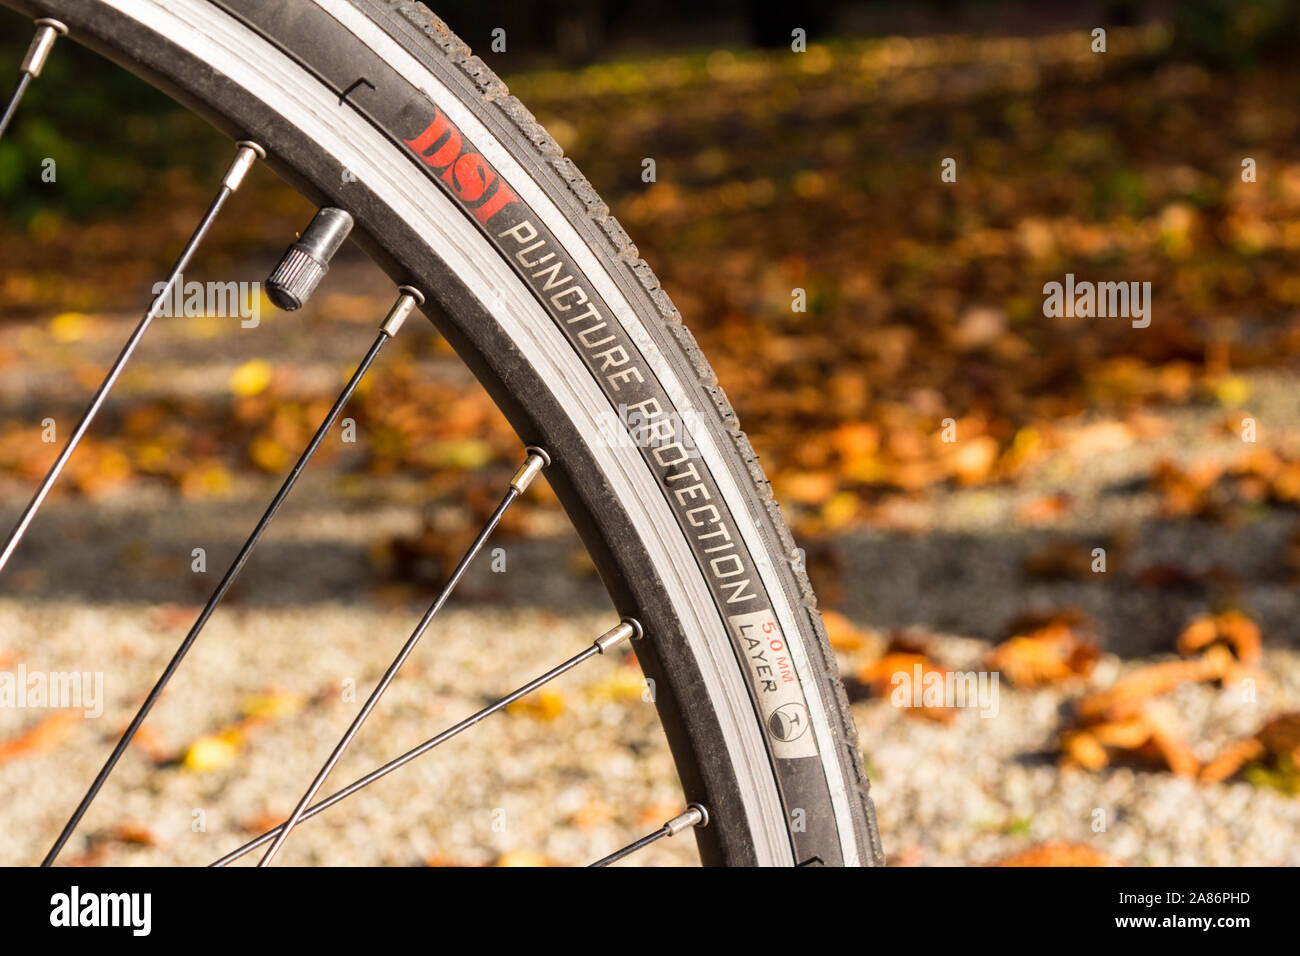 puncture resistant bicycle tyres